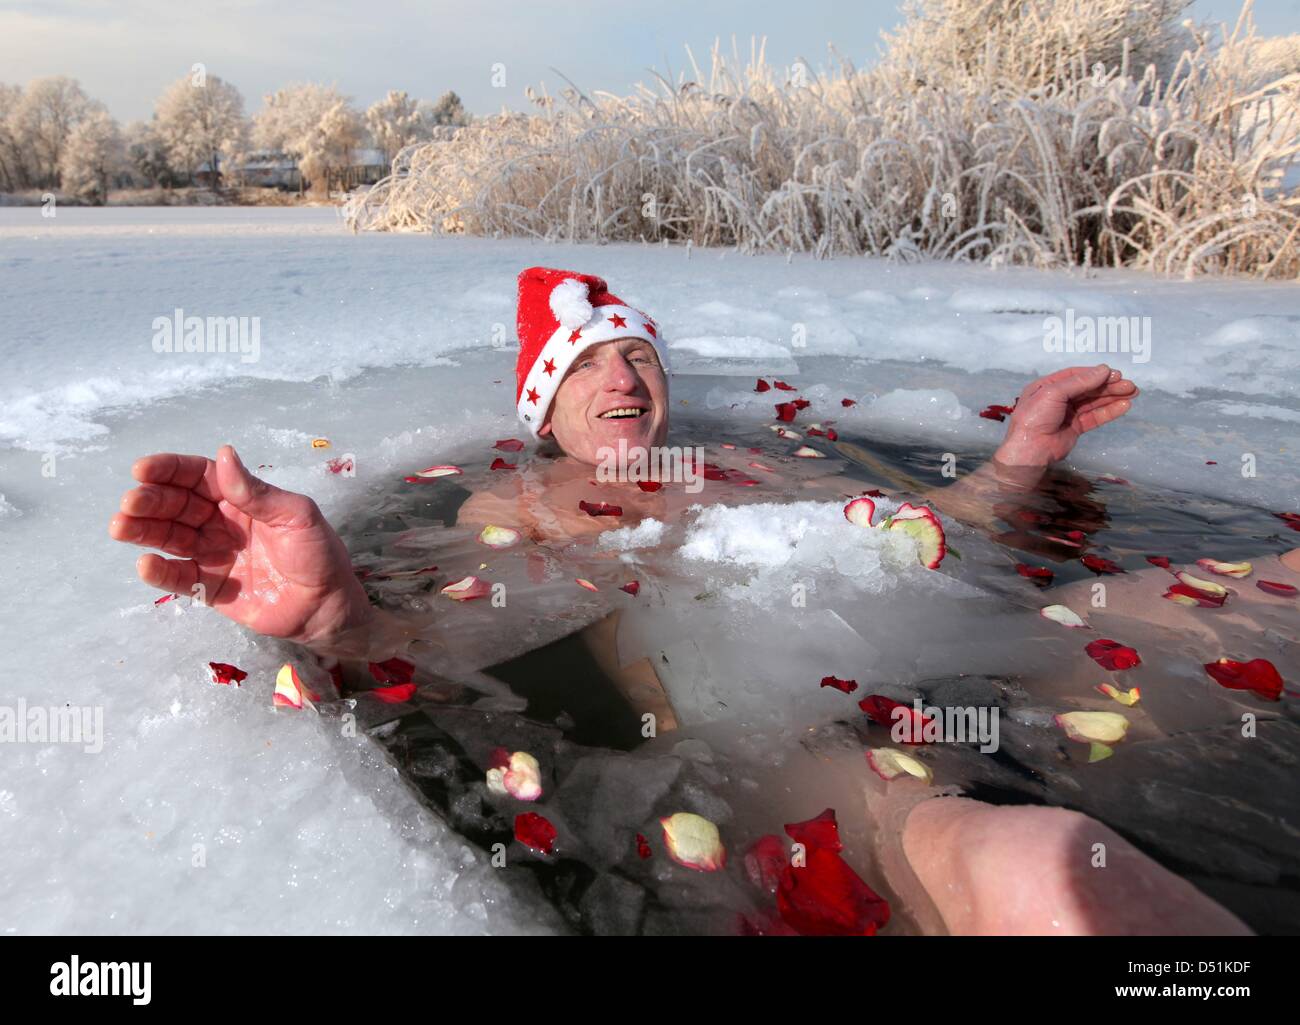 Extreme sportsman Helmut Kunde (67) bathes in icy water of a lake in Handewitt, Germany, 20 December 2010. At temperatures of minus six degrees Celsius Helmut Kunde spends eight to ten minutes a day in the icy water. Photo: Robert Seeberg Stock Photo